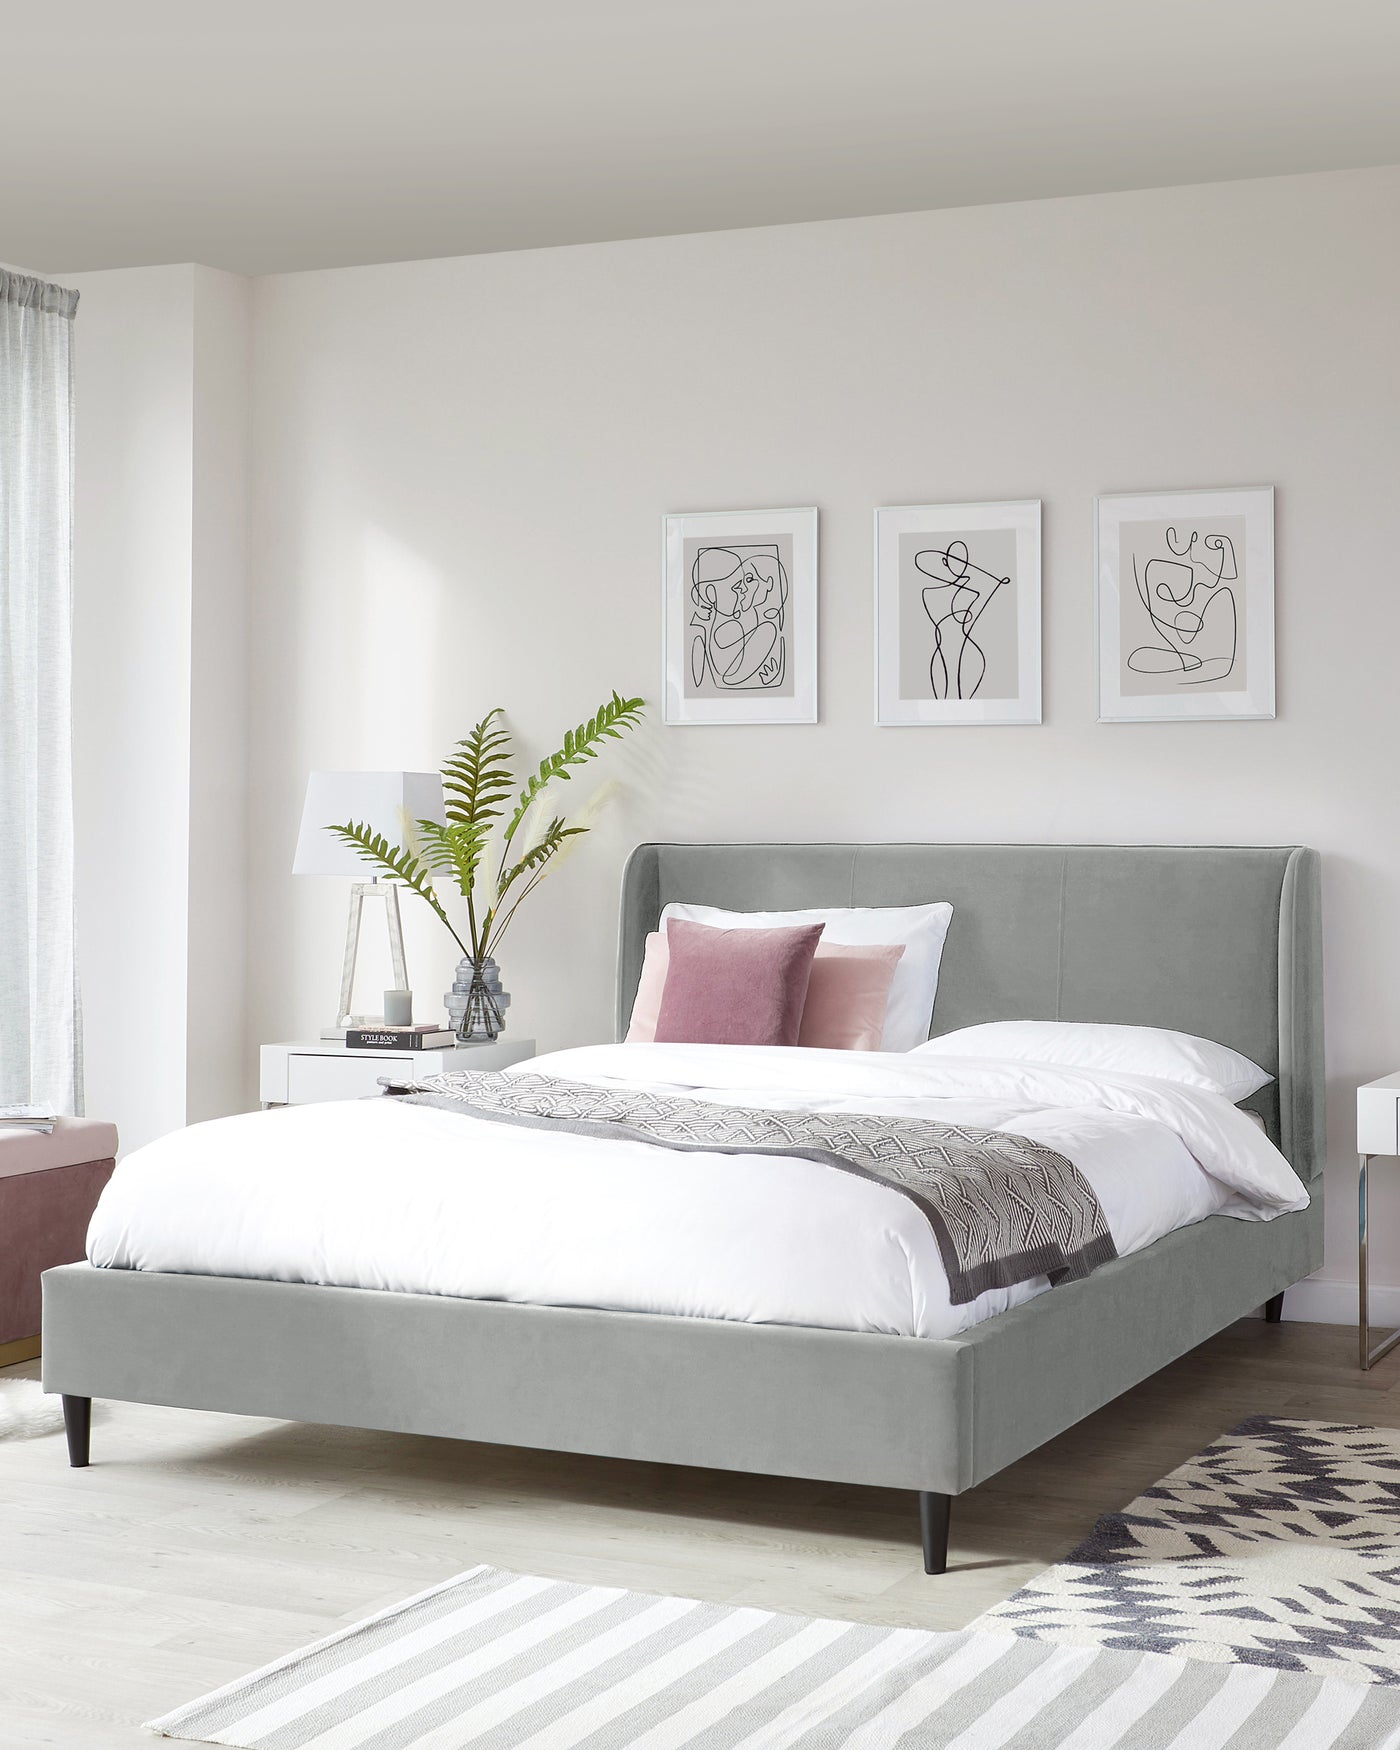 Elegant contemporary style queen-sized bed with a plush, button-tufted headboard in a soothing grey upholstery. The bed frame rests on low-profile dark wooden legs, coordinating with crisp white bedding and accent pillows in subtle shades of pink and grey.